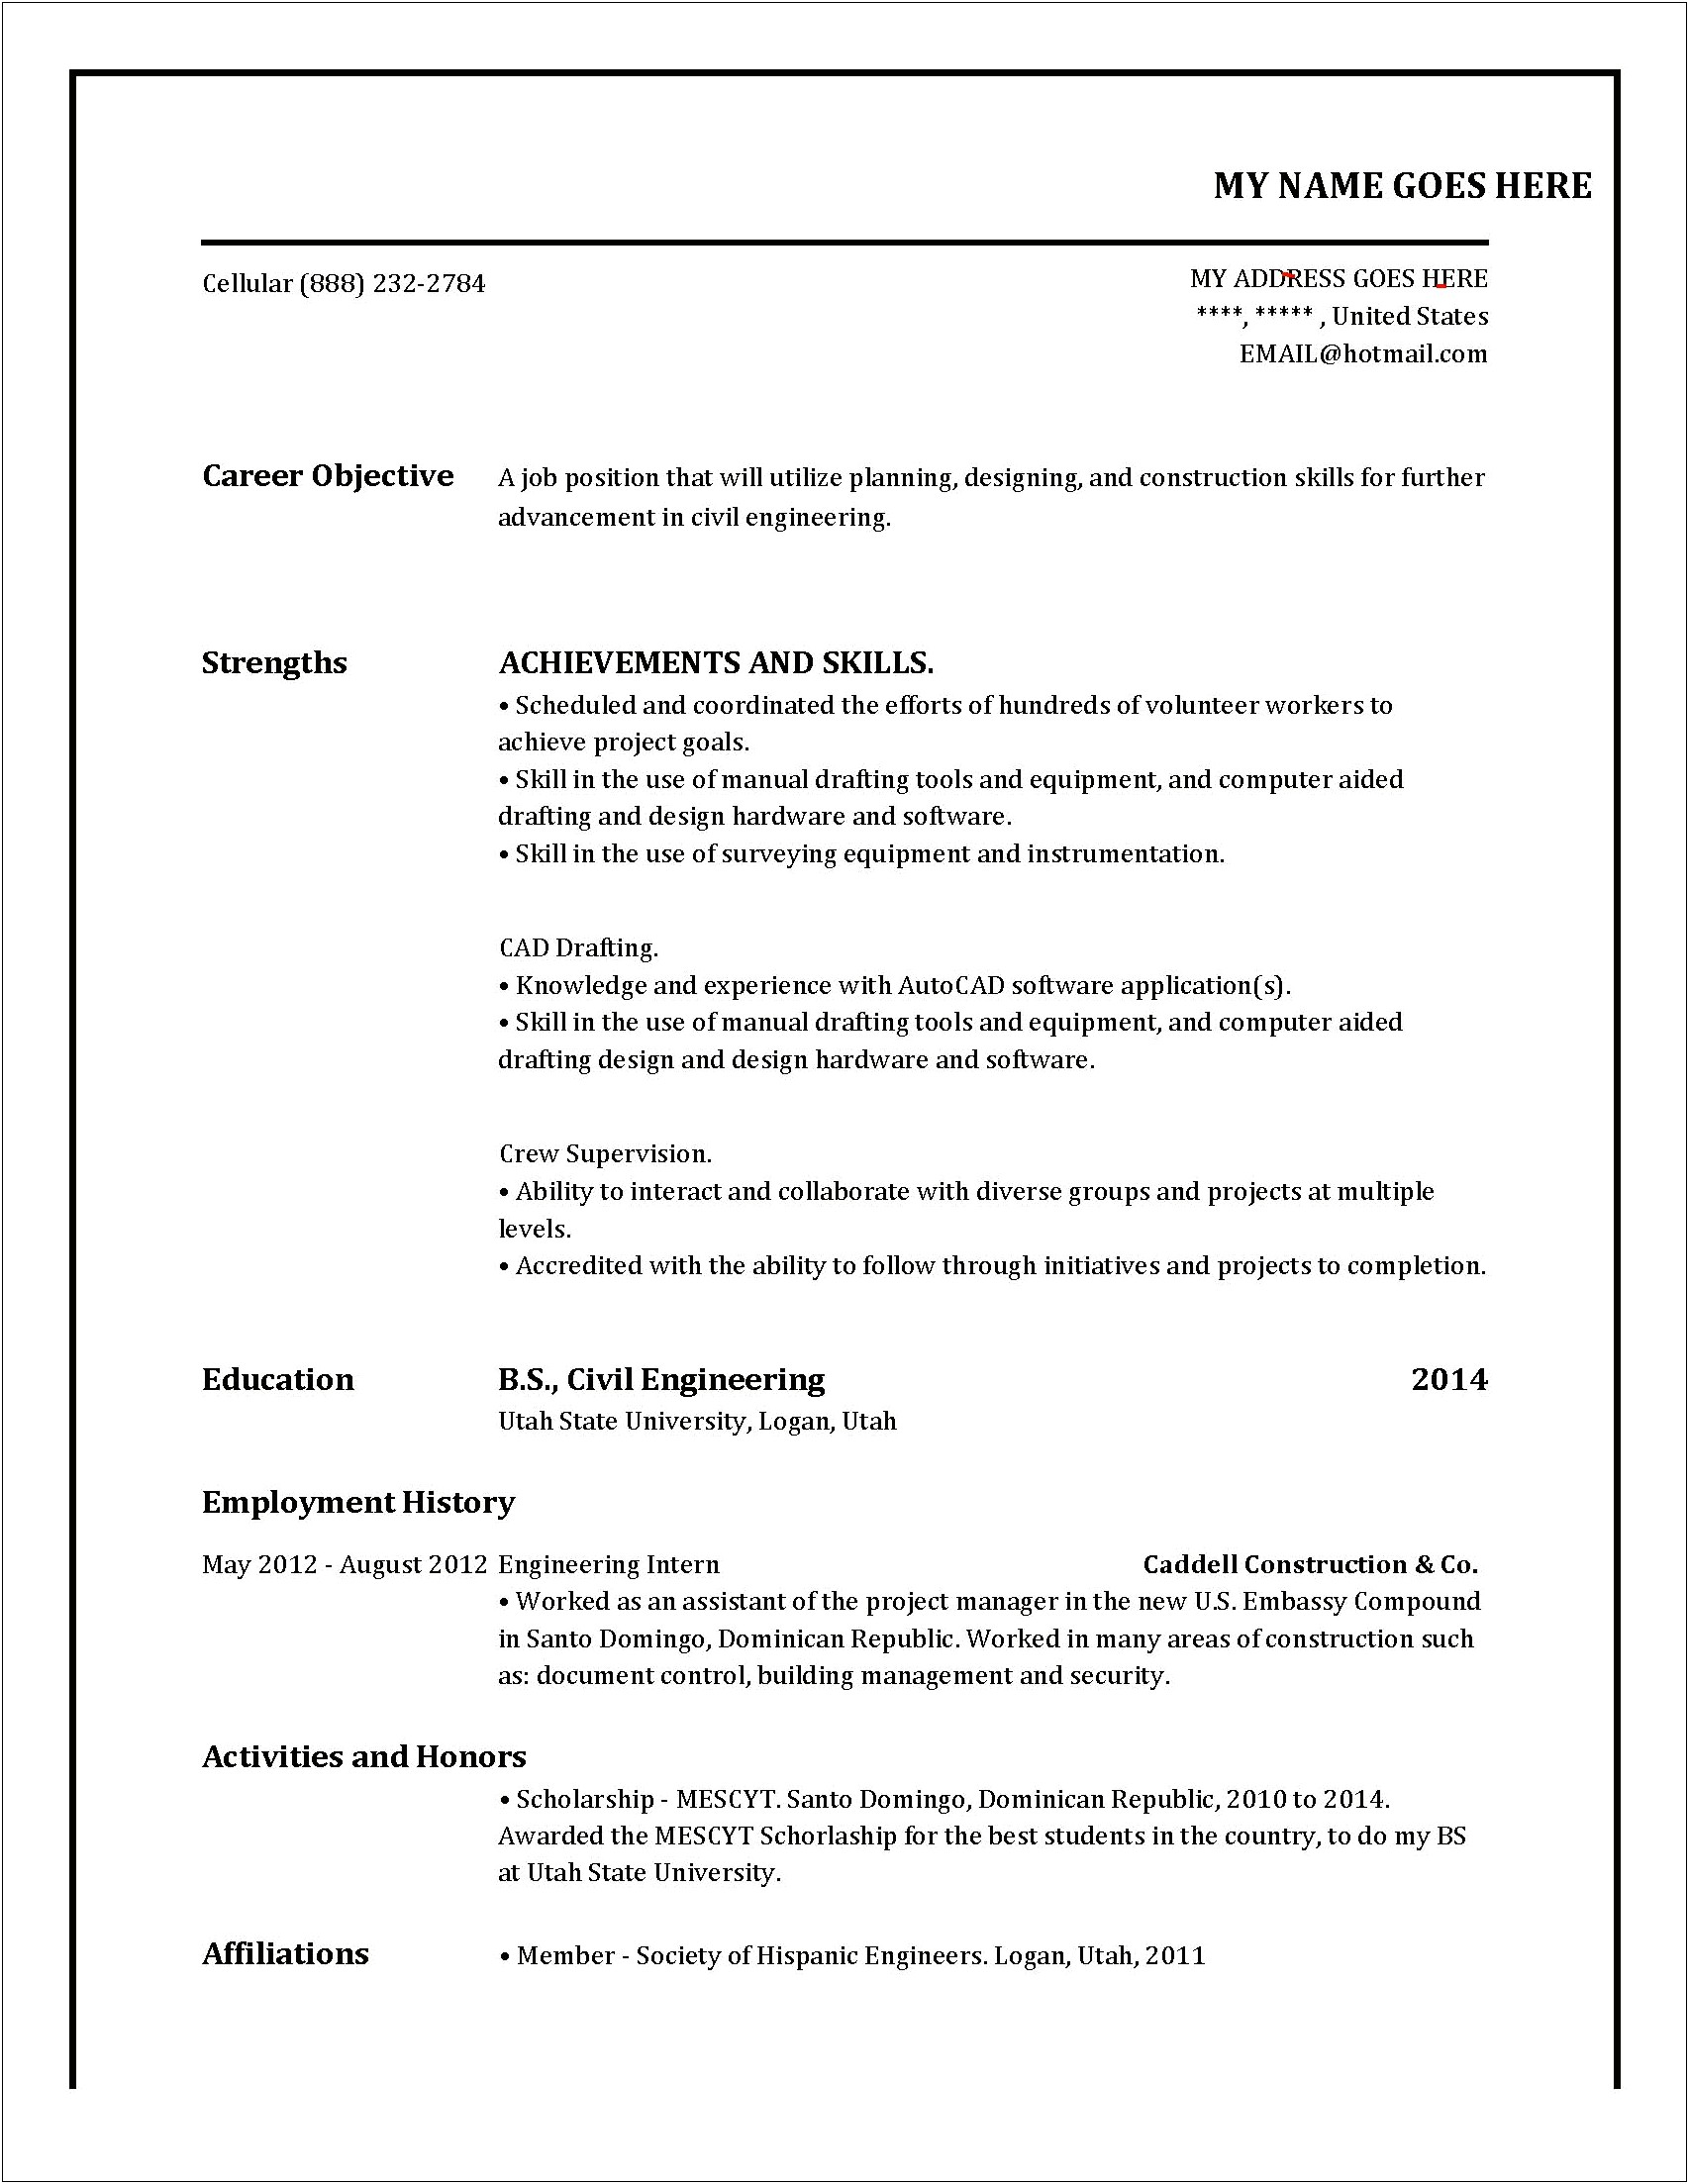 Resume Objective For Skilled Worker